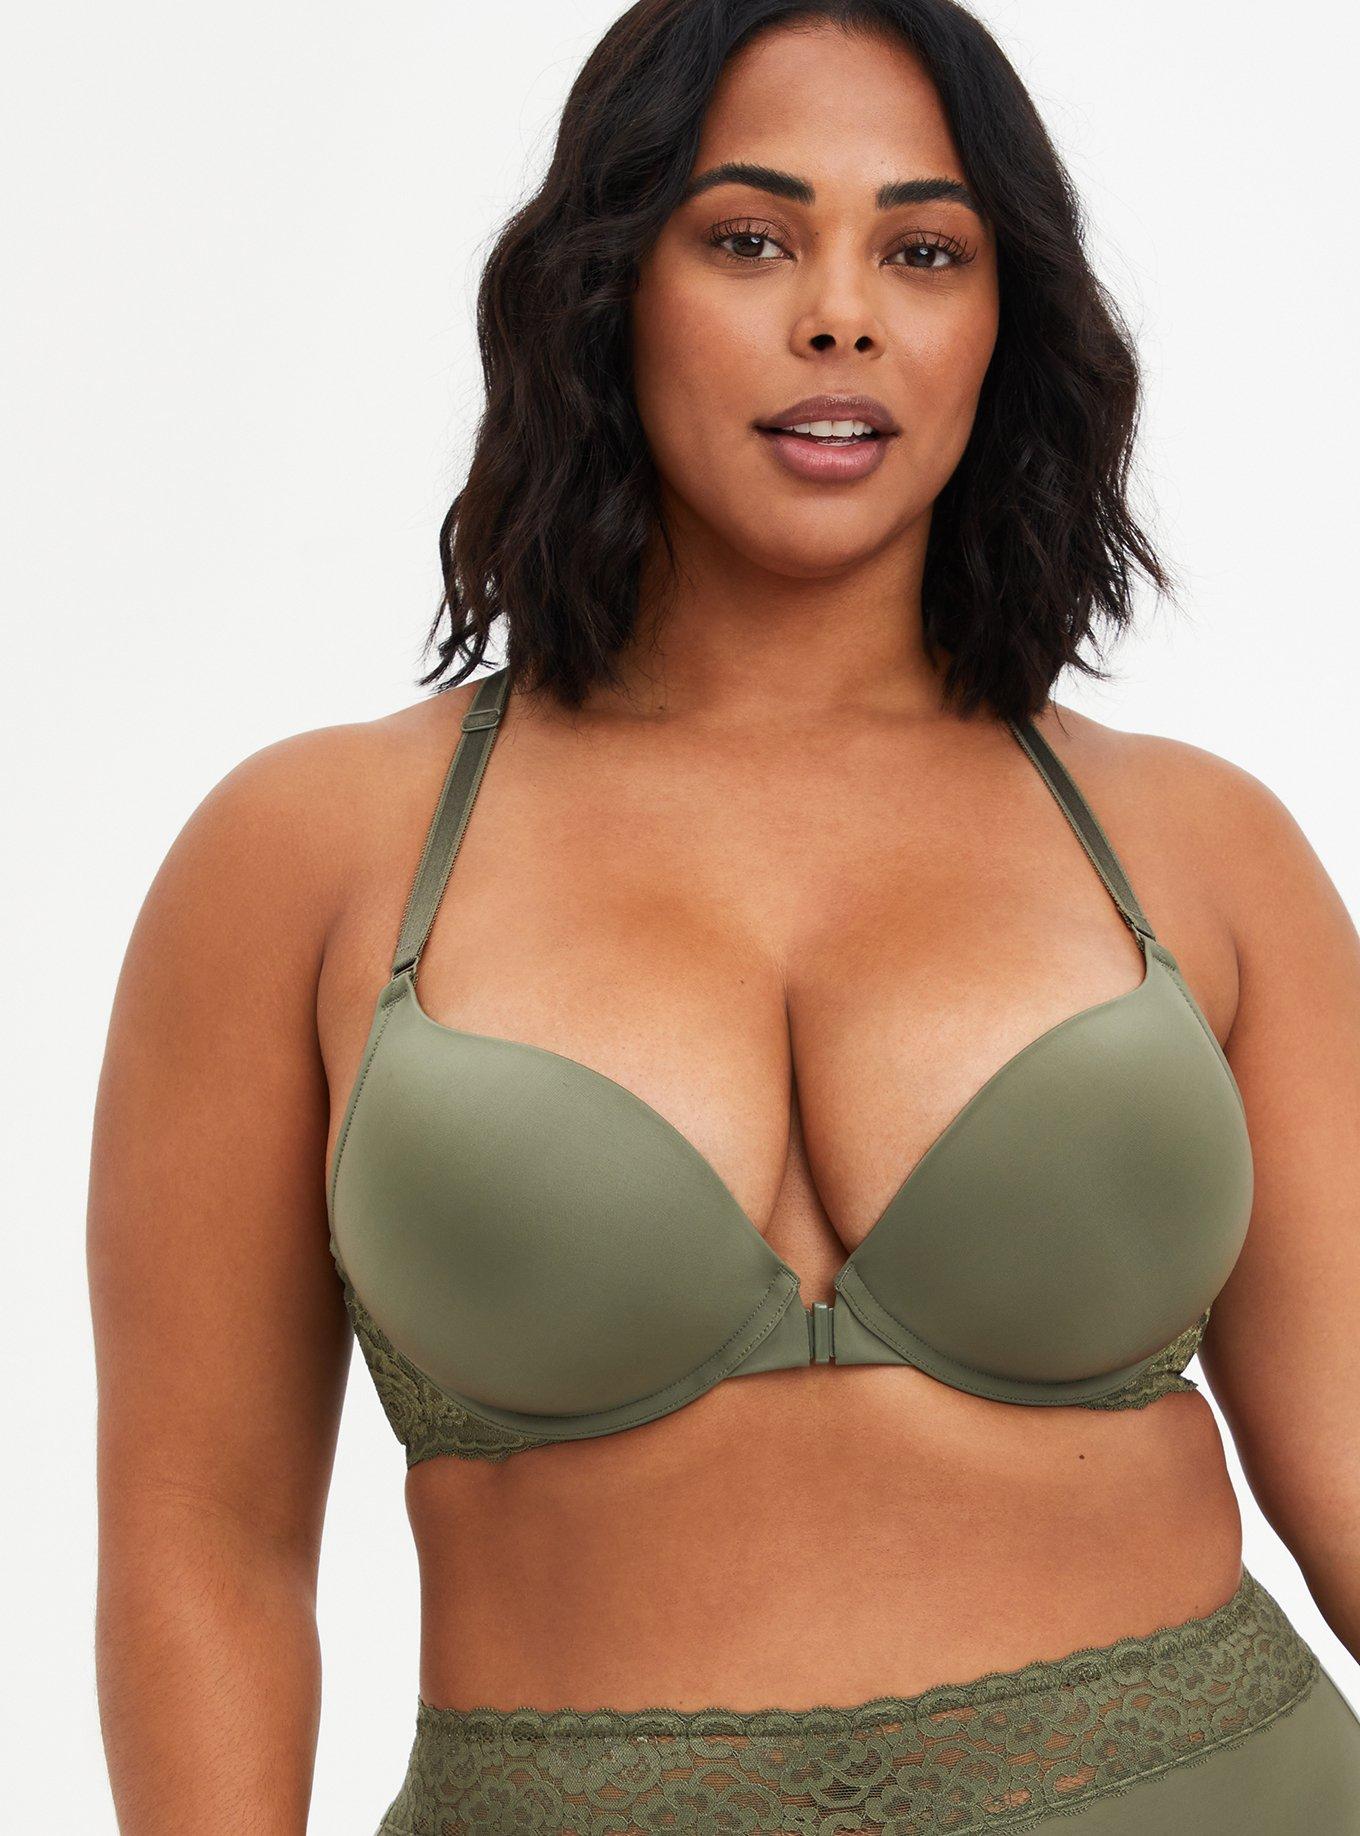 Torrid Curve Wireless Bra Size 38DD New But Washed - Never Worn